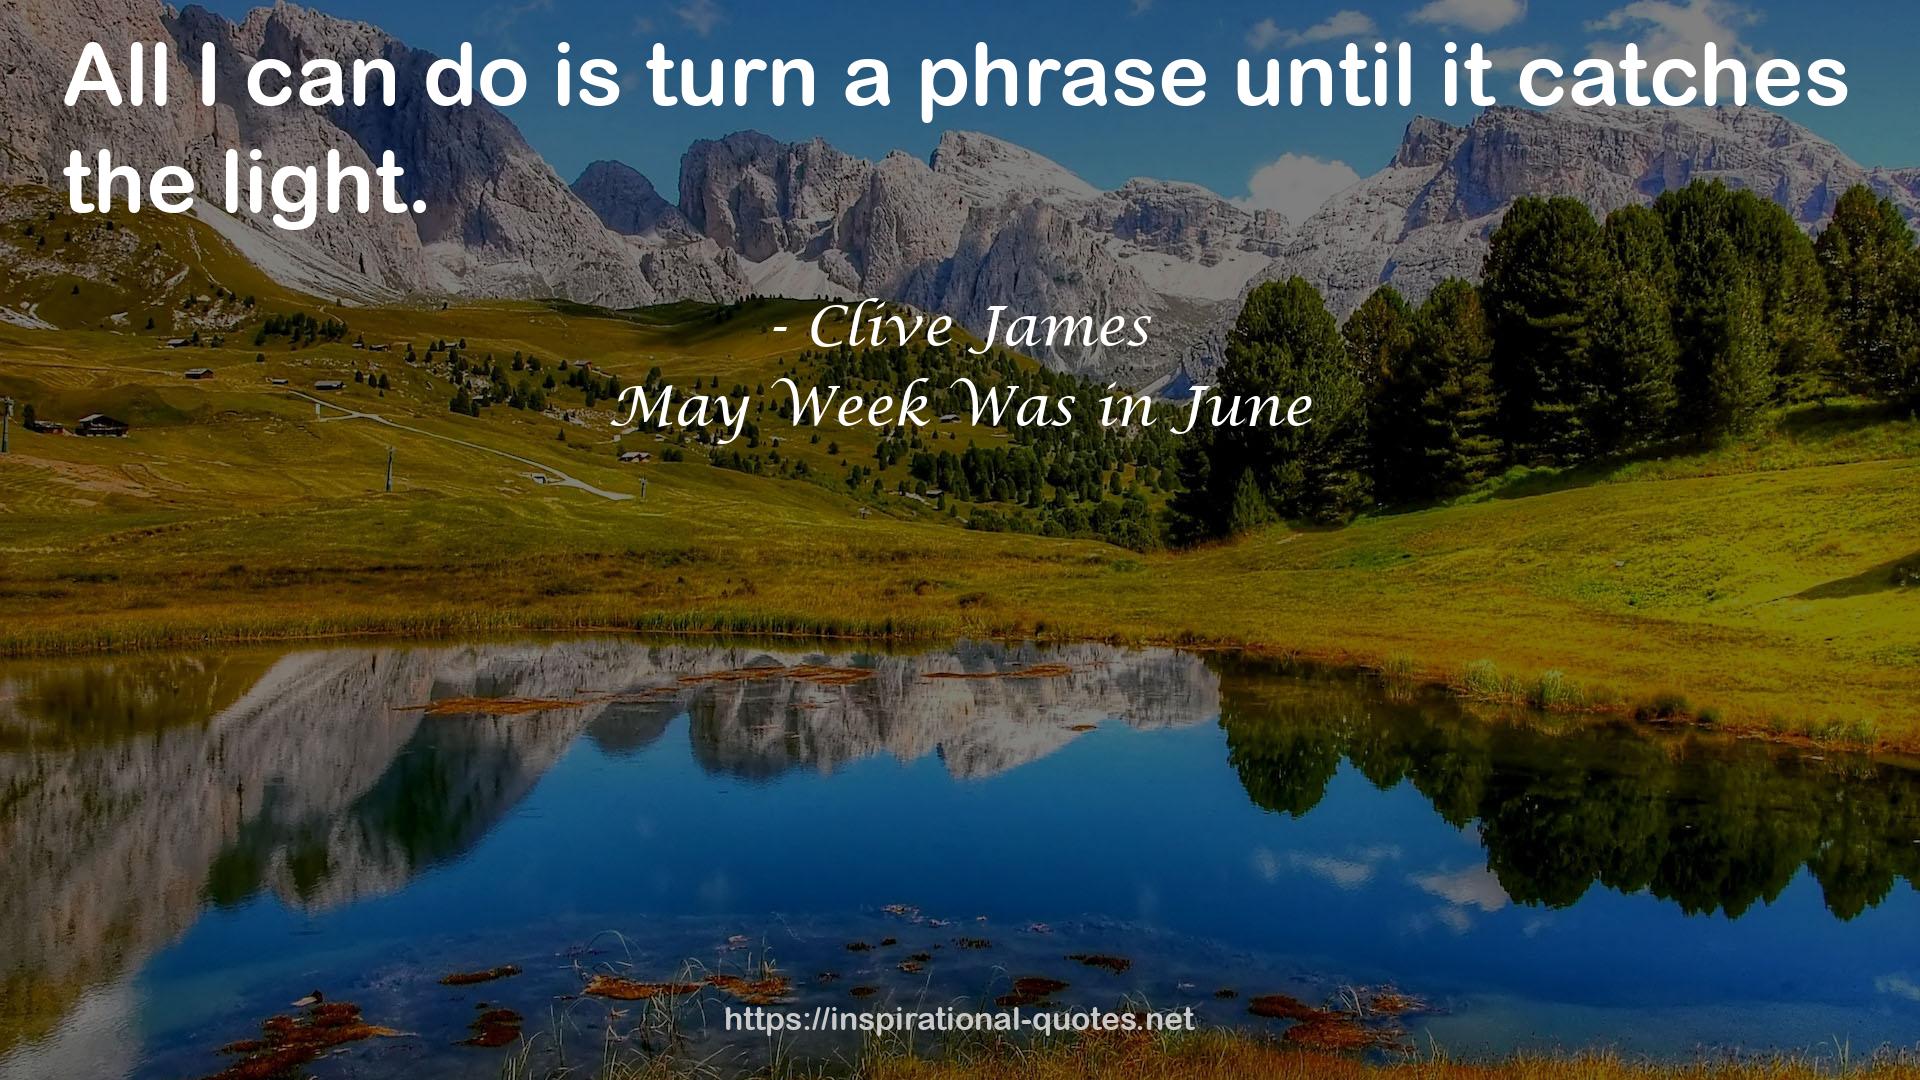 May Week Was in June QUOTES